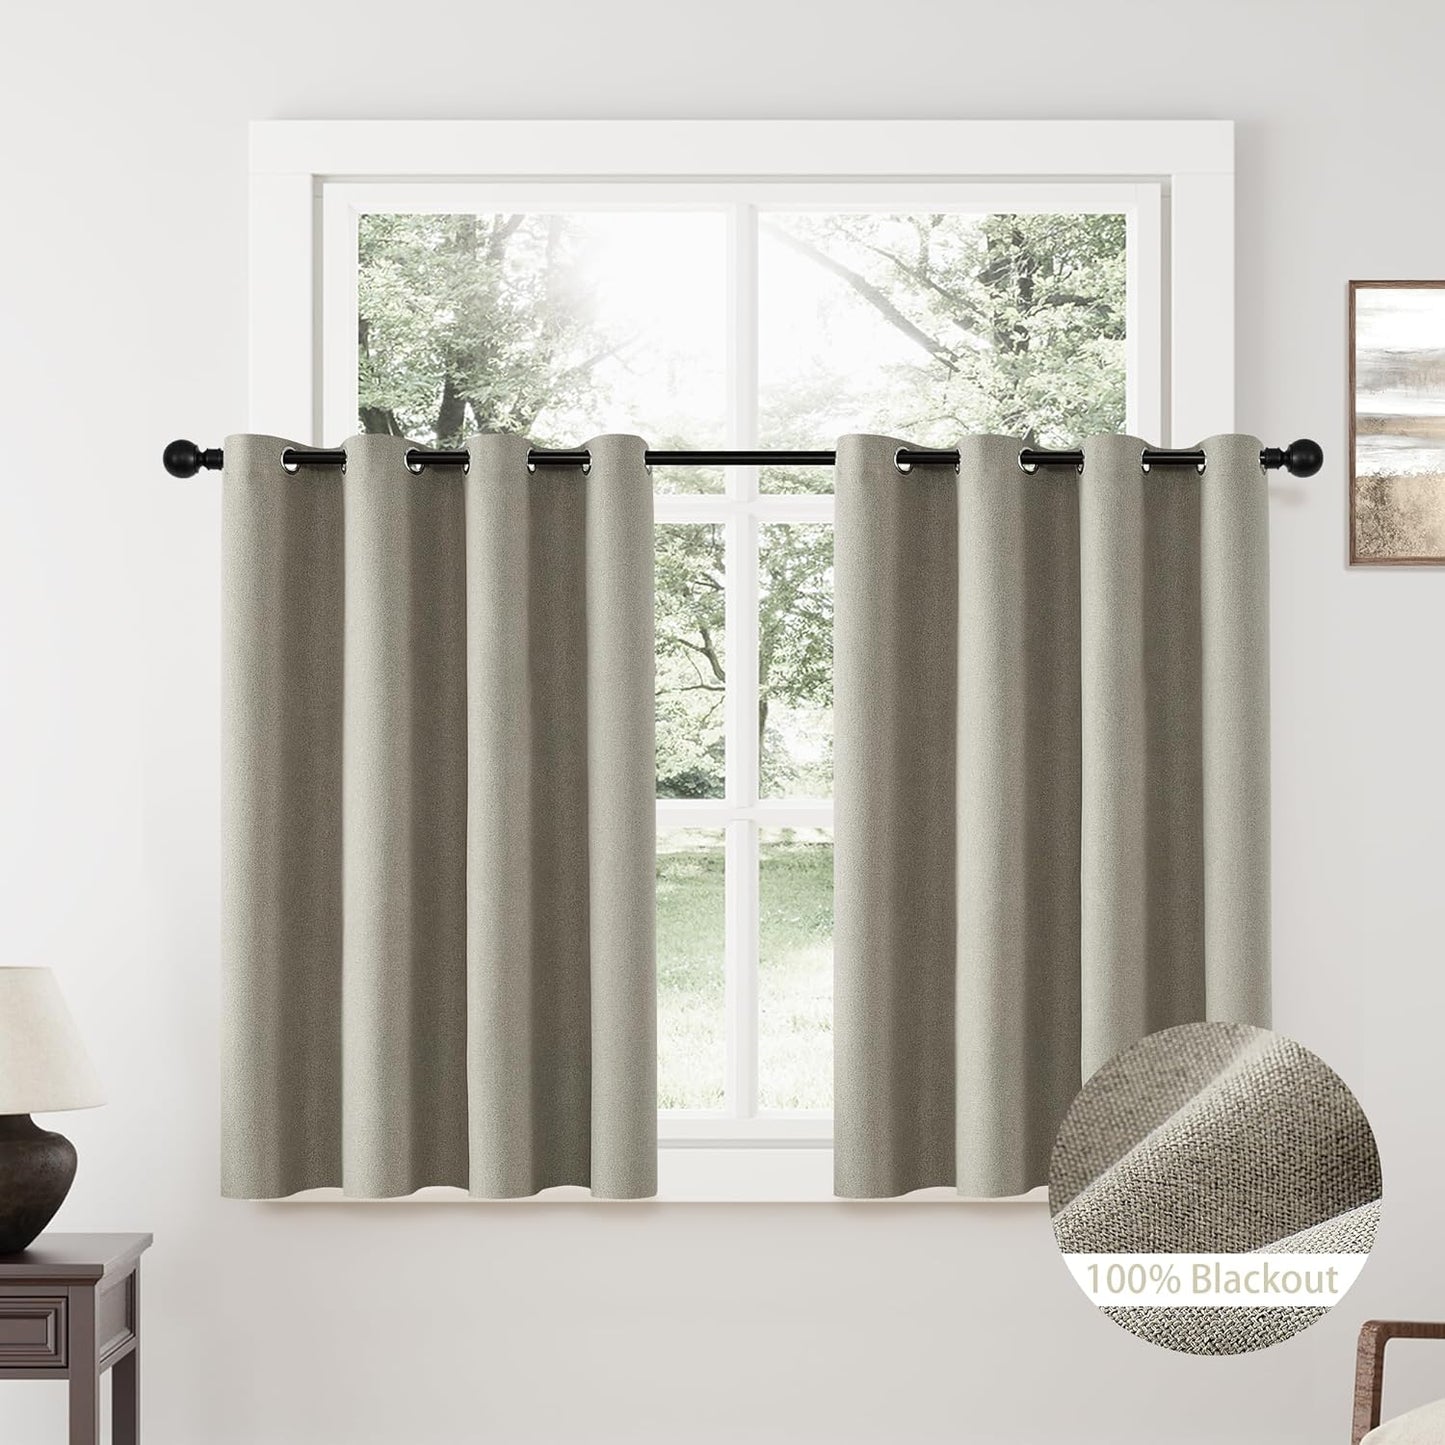 Full Blackout Curtains 84 Inches Long for Bedroom, Neutral Flax Linen Black Out Drapes, 2 Panels Grommet Room Darkening Curtains 84 Inch Length with Backing for Living Room Light Beige 52X84  ChrisDowa Sand 52W X 54L 